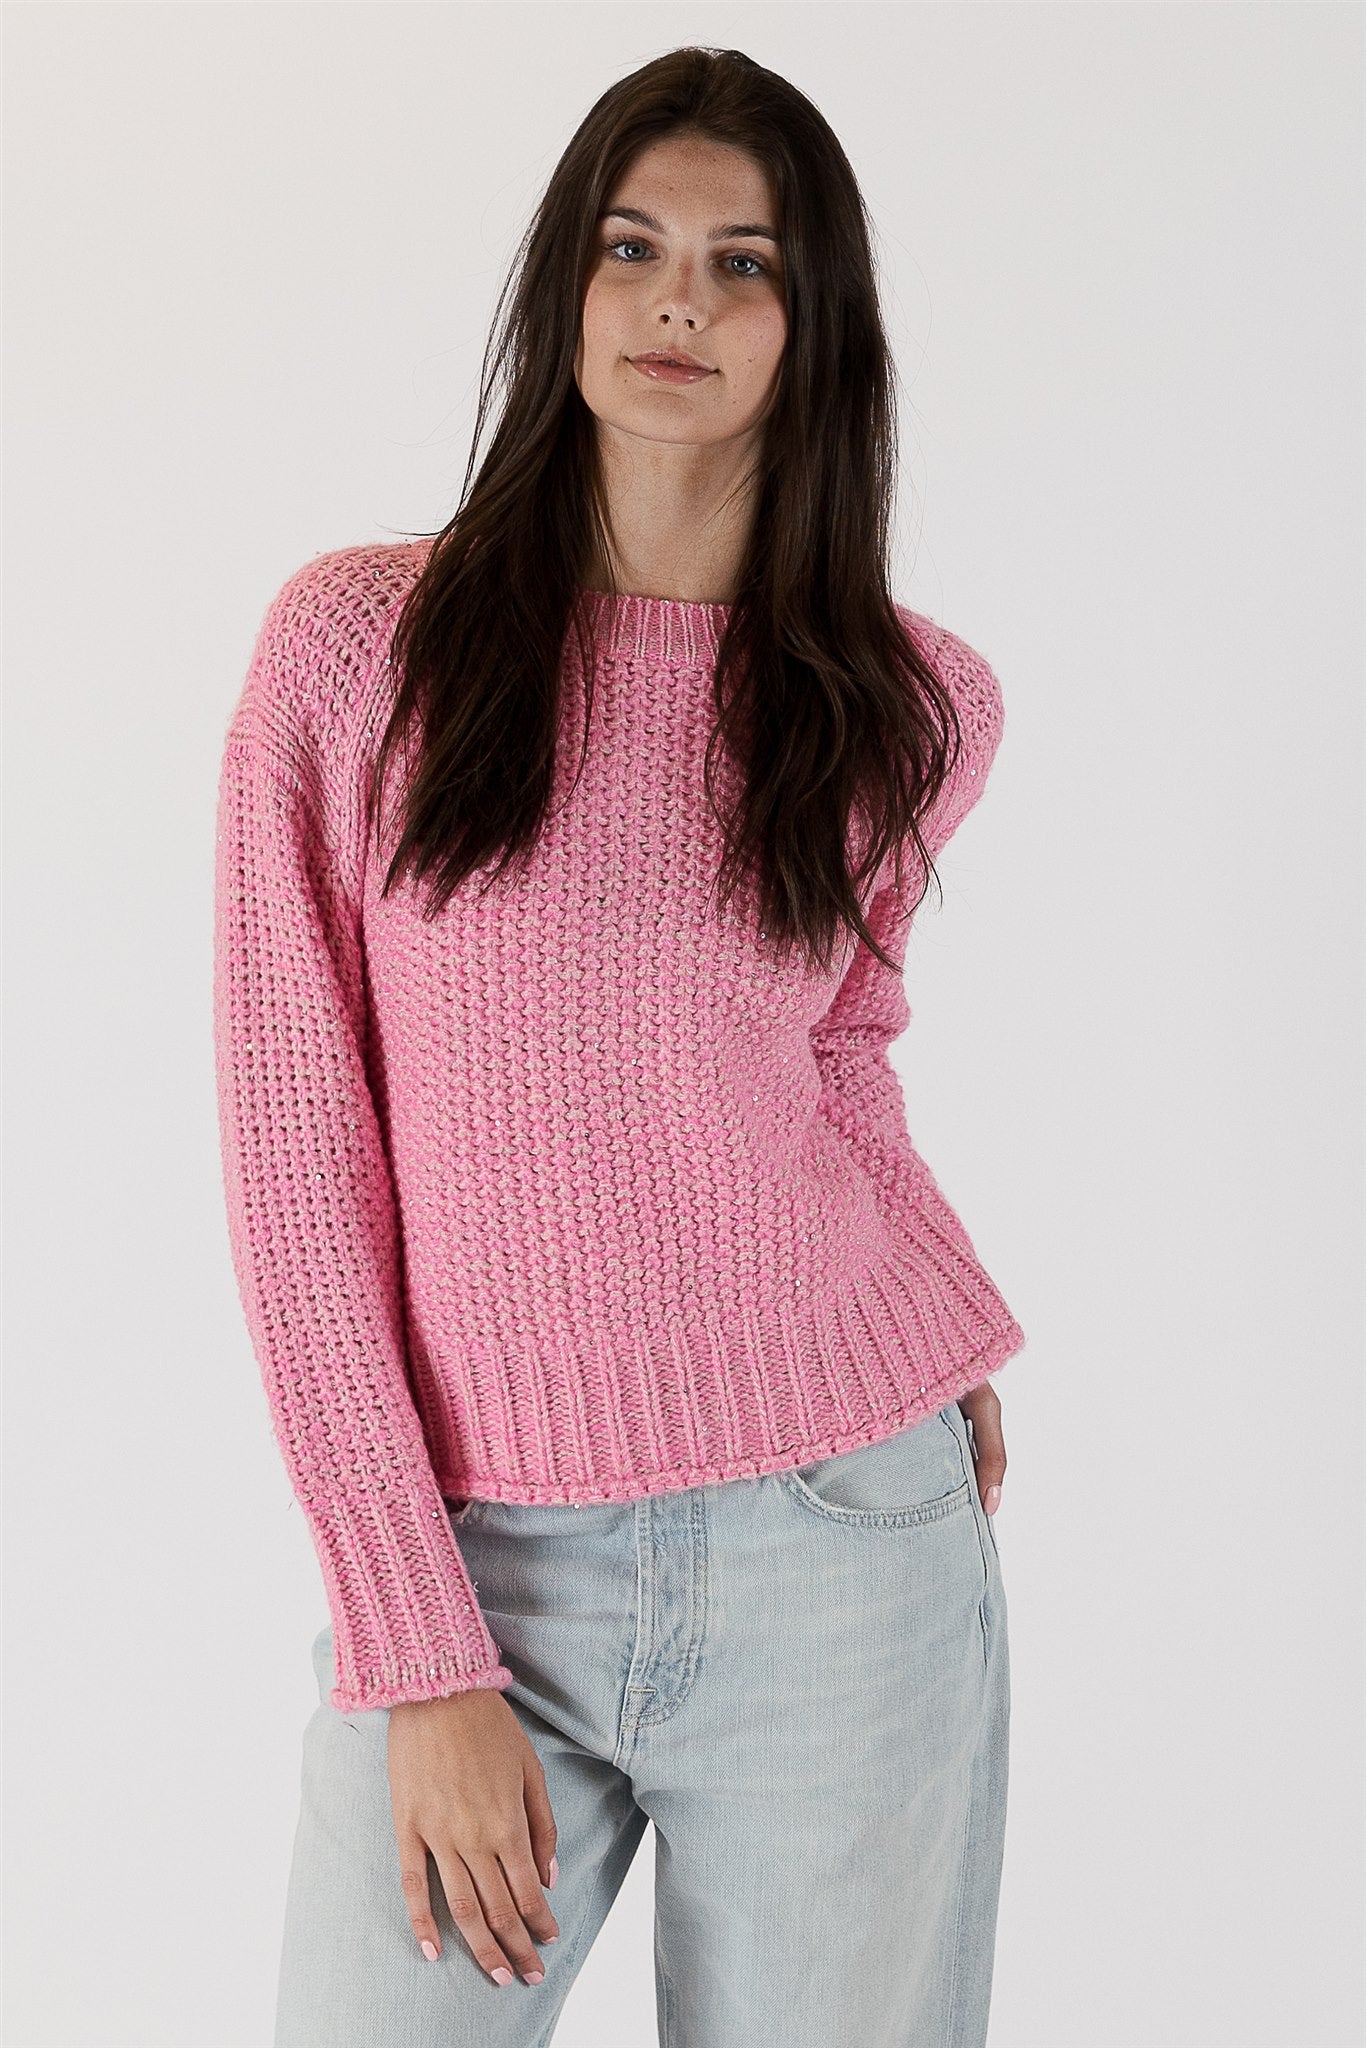 Lyla+Luxe Top - Sparkle Sweater - Pink